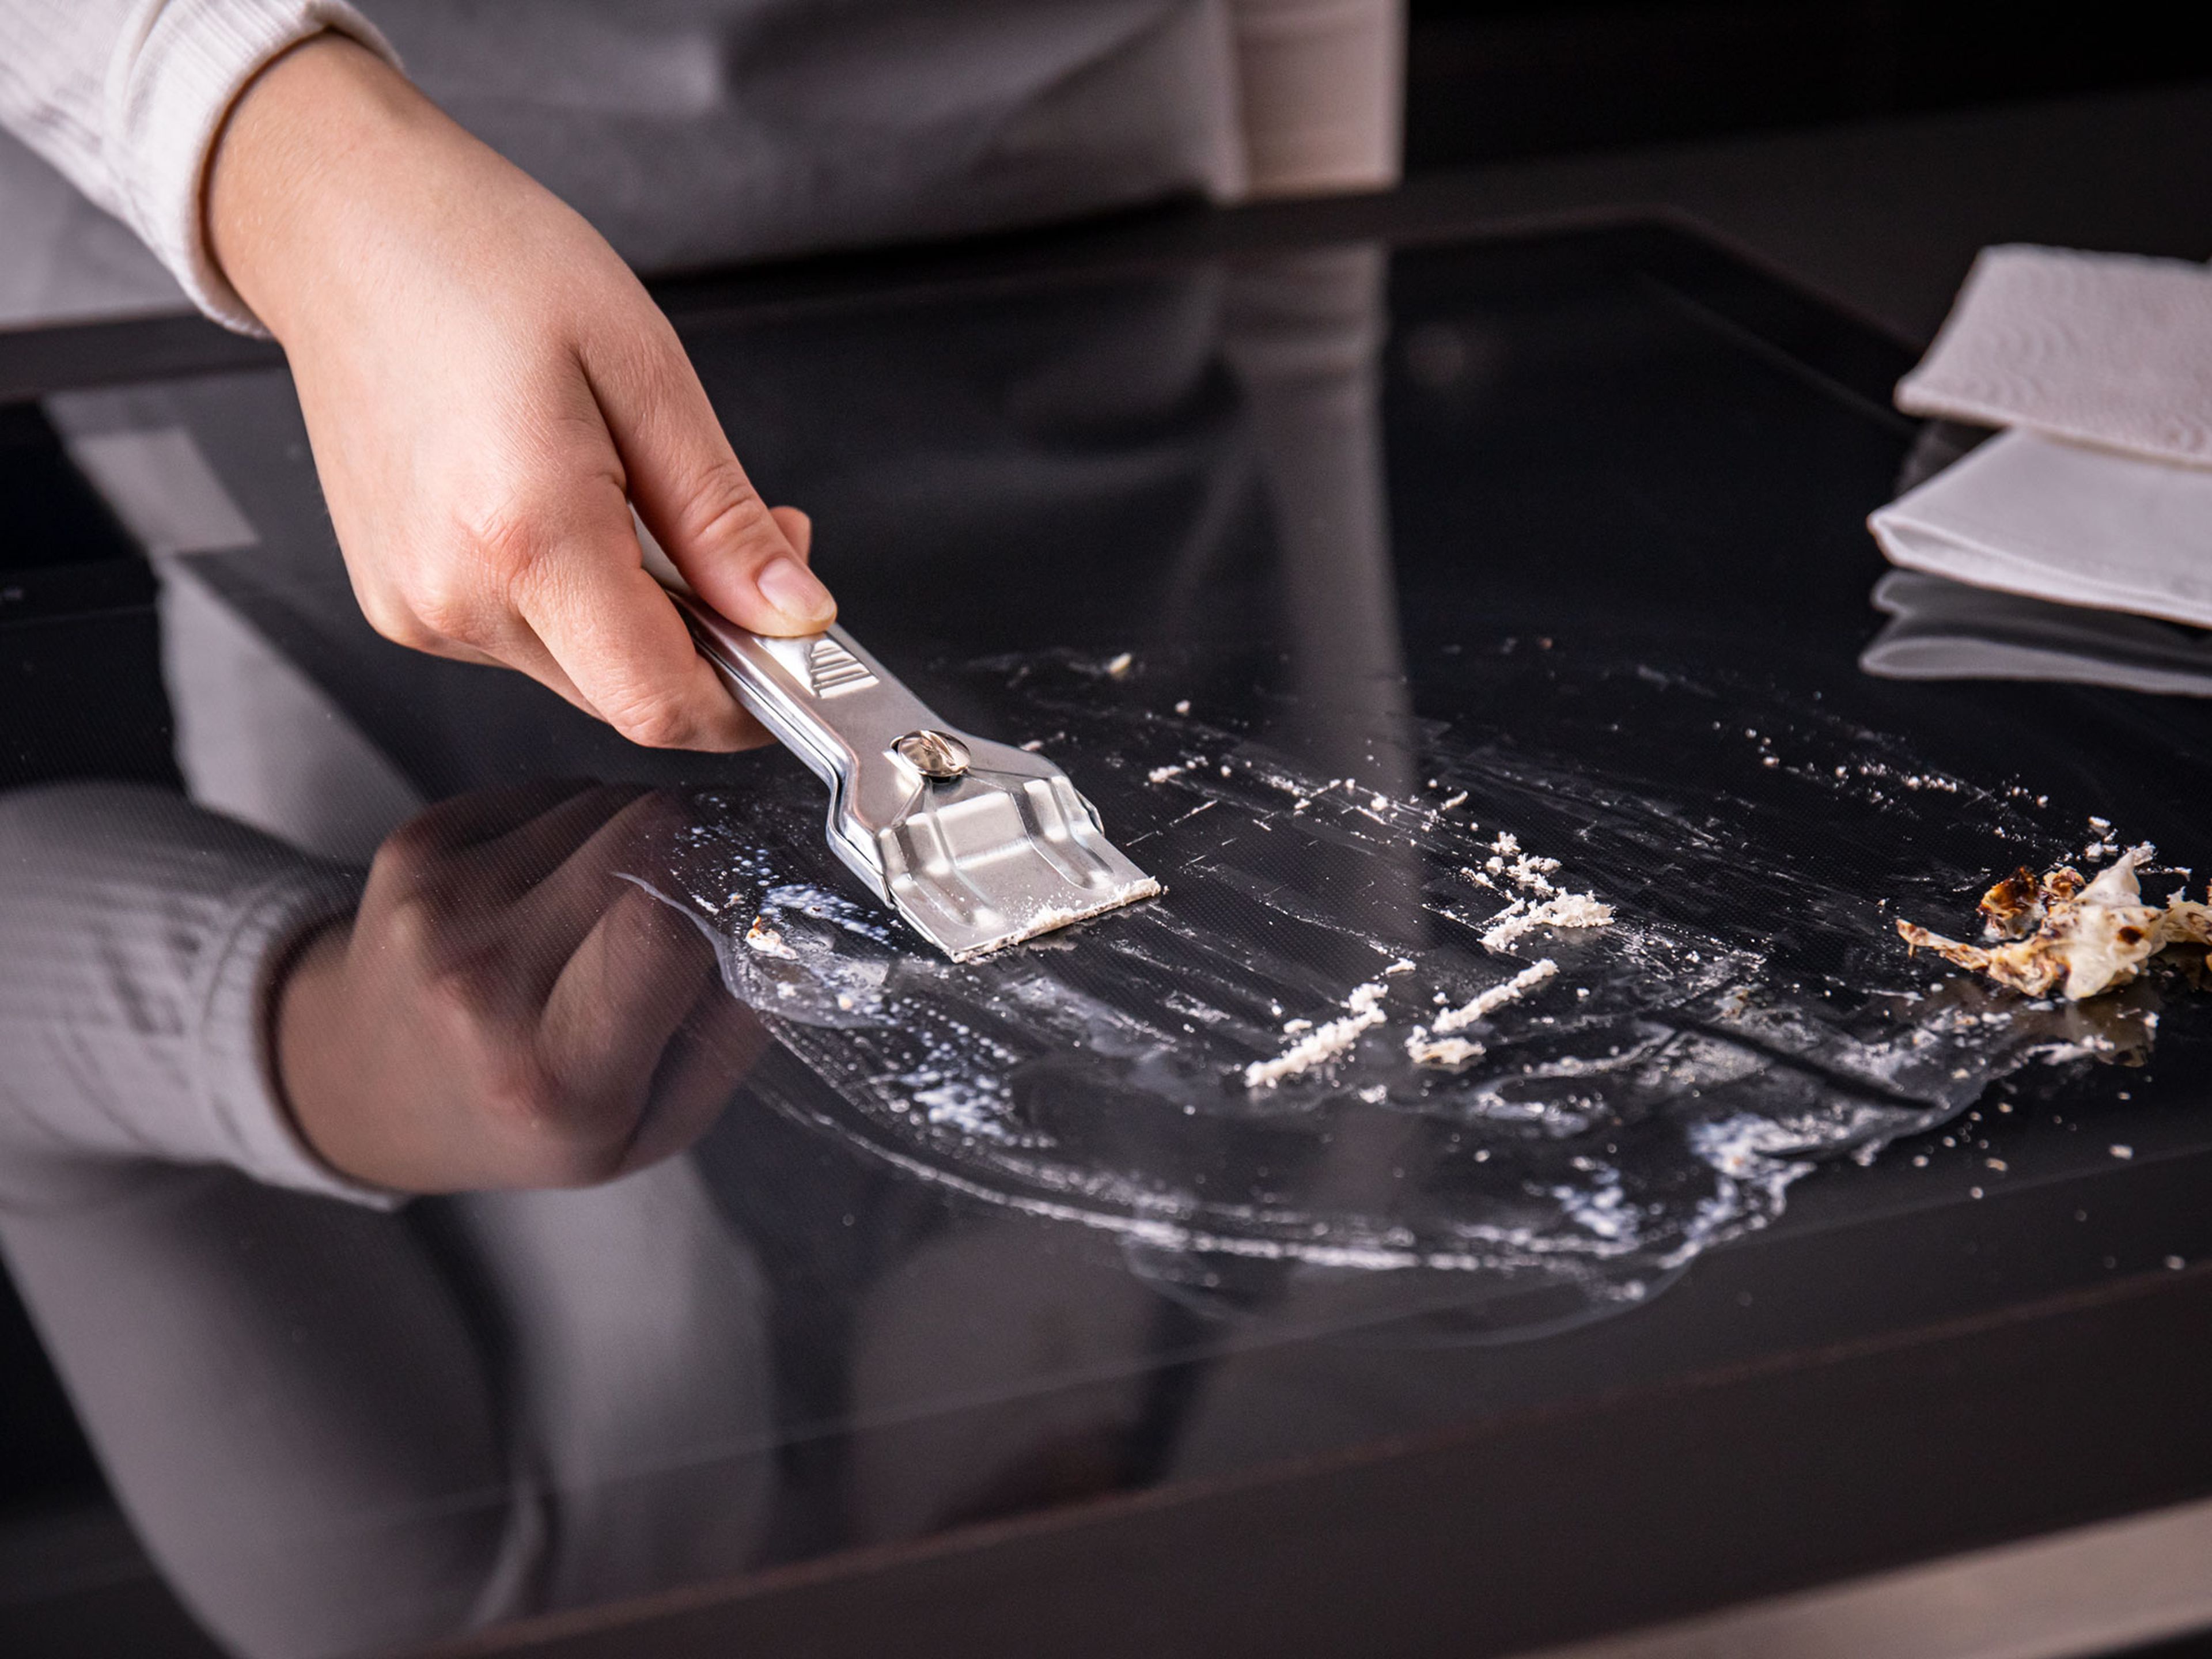 Minor cooking accidents can be solved with a simple cleaning routine. For difficult messes like burned milk or spilled pasta water, use a suitable metal scraper. Carefully scrape away the mess, then wipe any remaining residues from the cooktop.